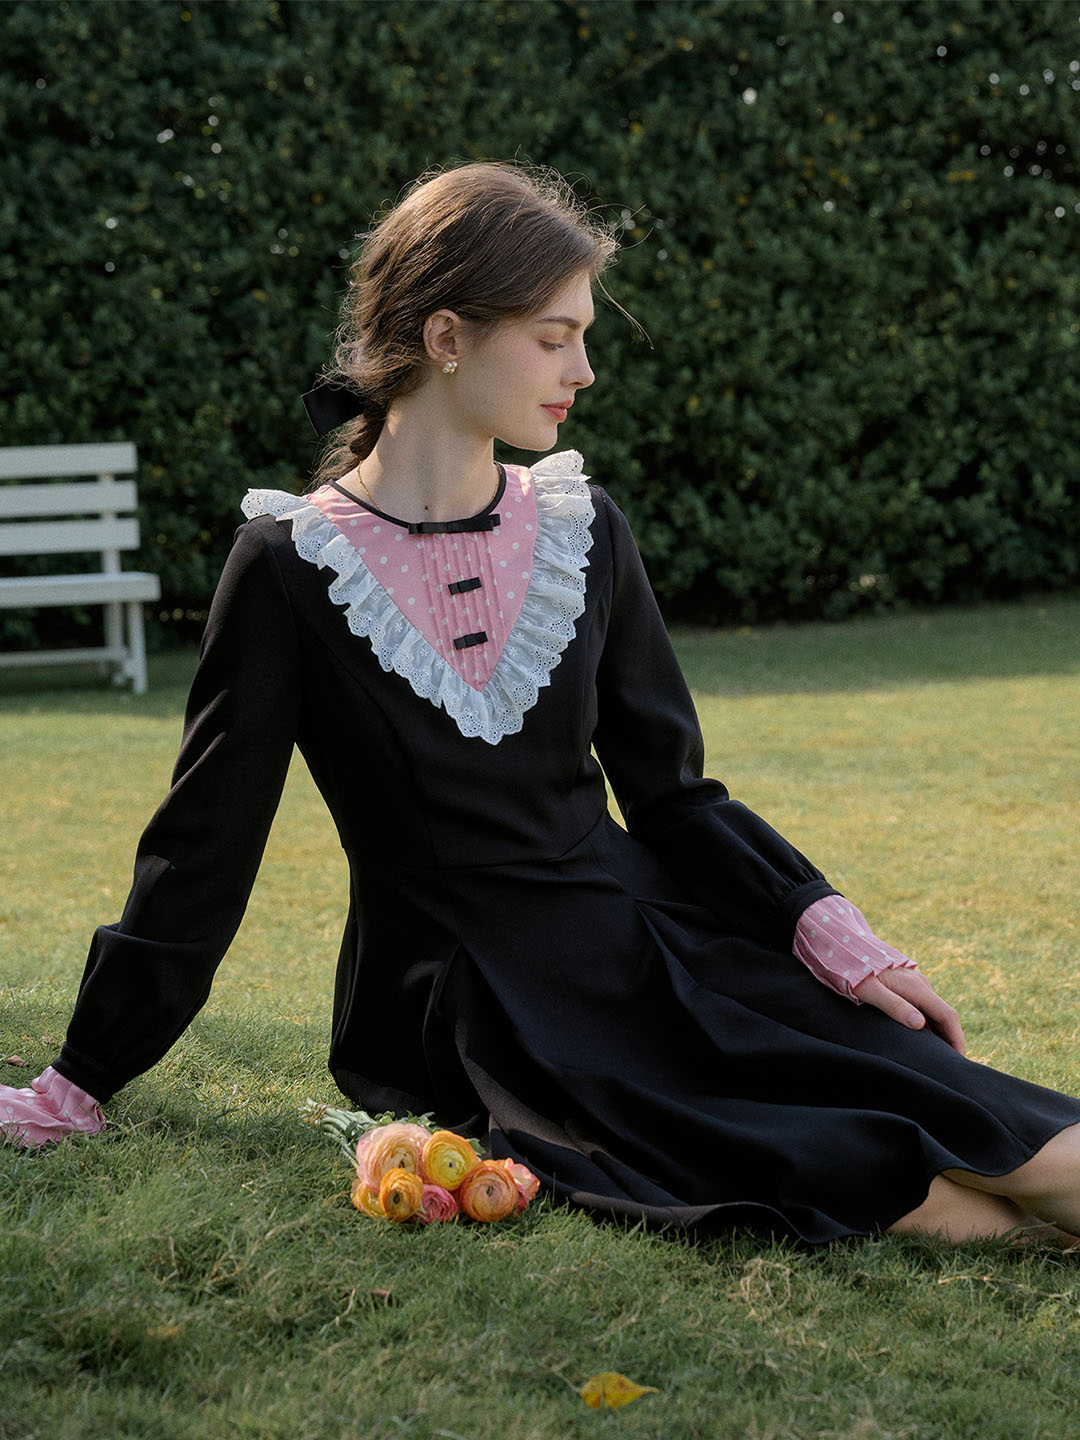 【Final Sale】Ava Sweet Contrasting Lace Patchwork Dress